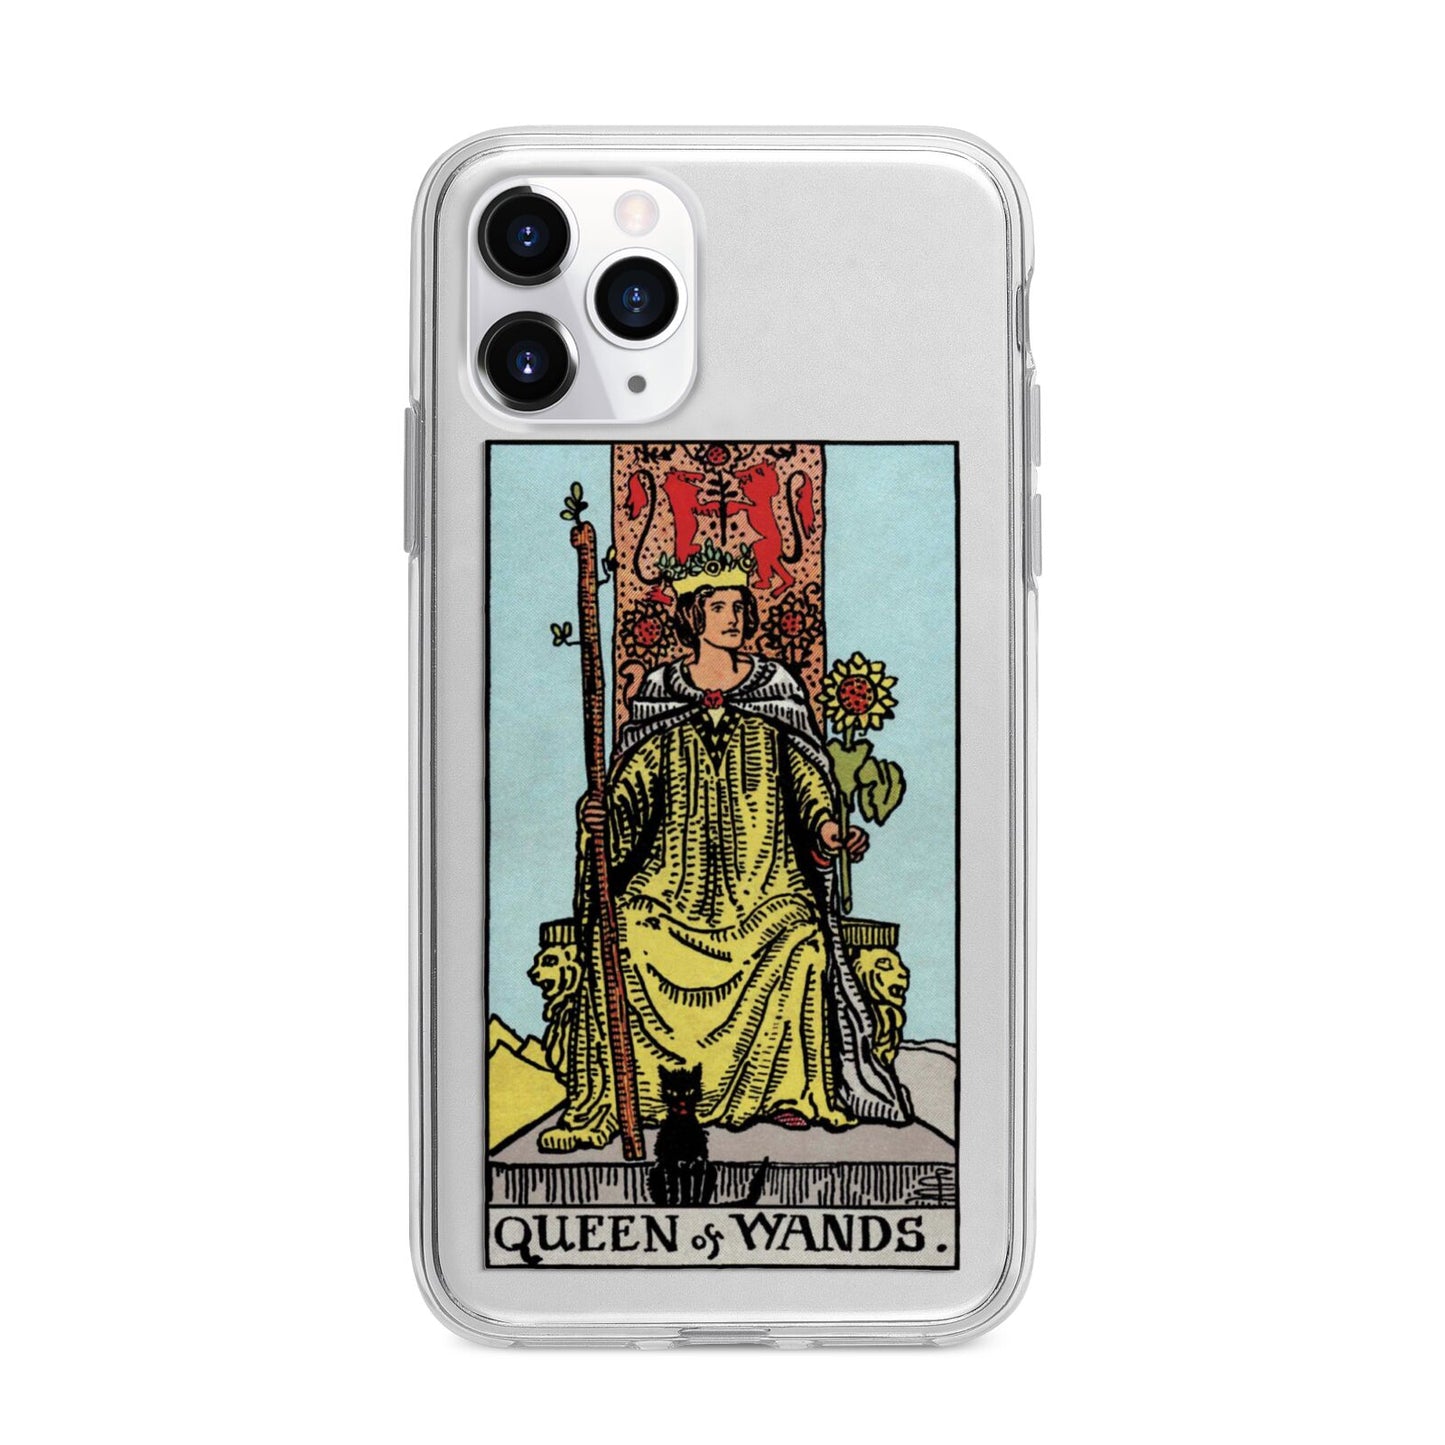 Queen of Wands Tarot Card Apple iPhone 11 Pro in Silver with Bumper Case